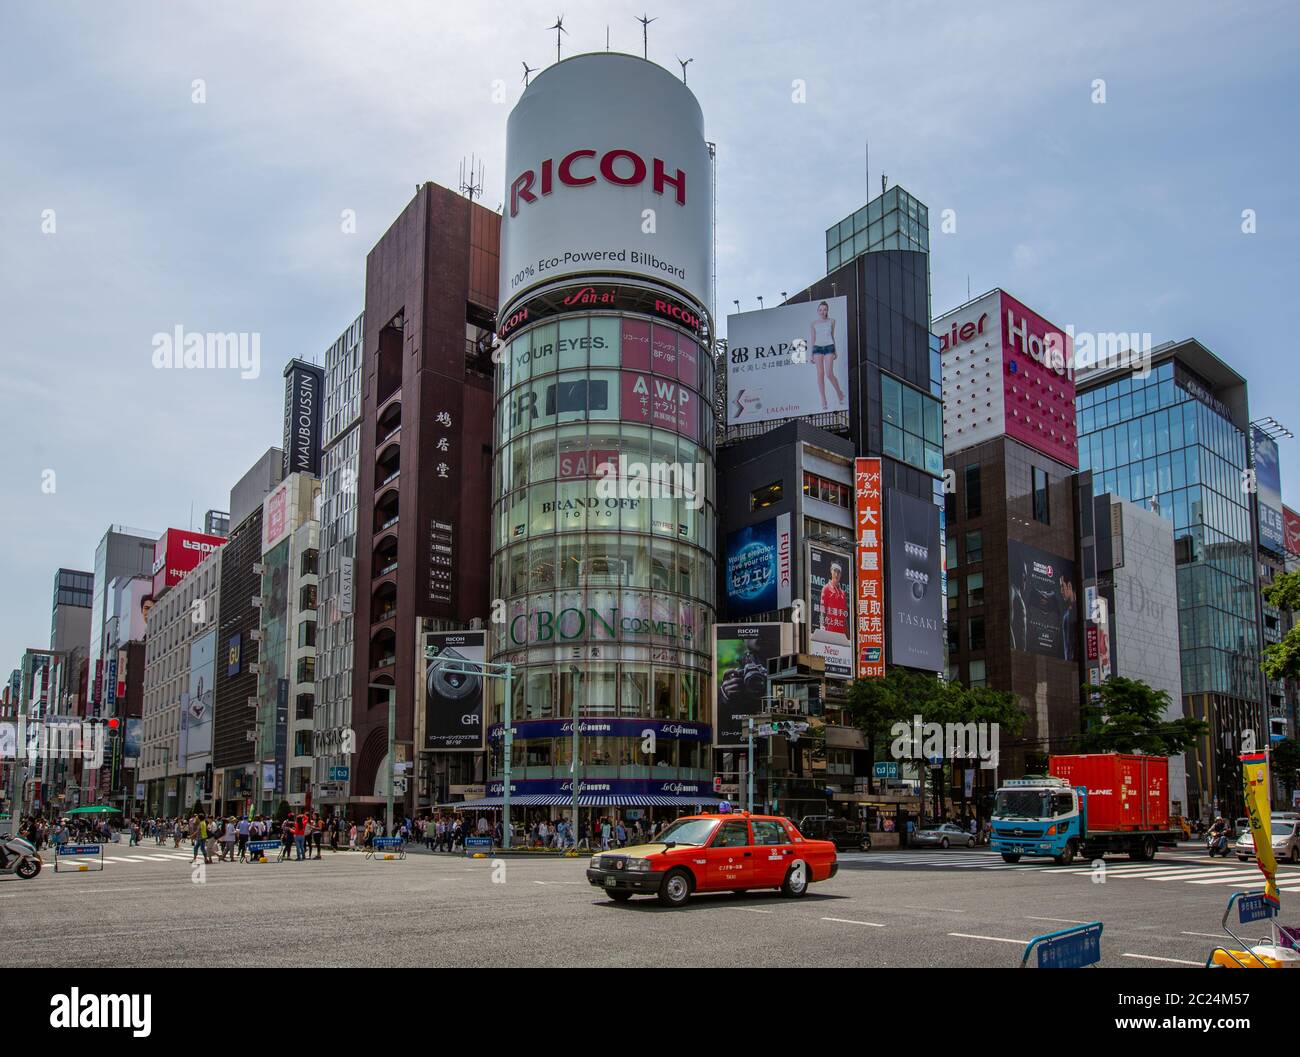 Ricoh buildings in Ginza street, Tokyo, Japan Stock Photo